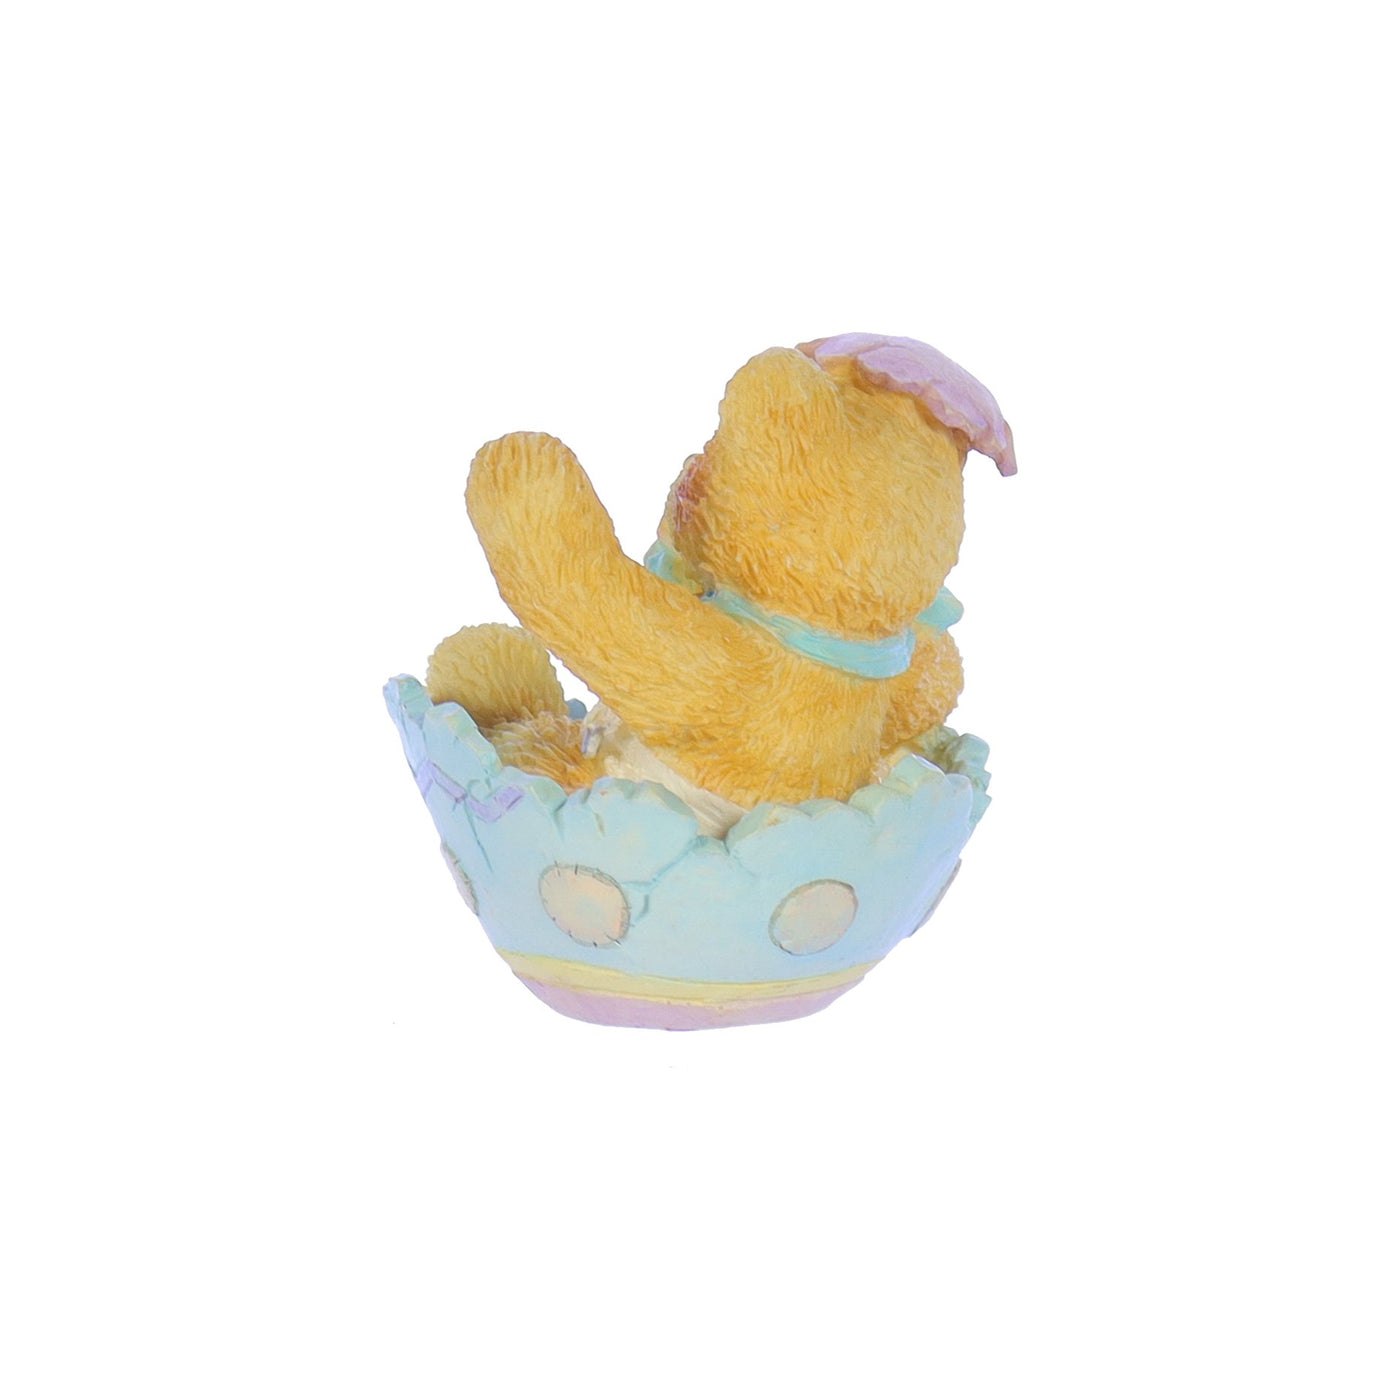 Cherished Teddies by Priscilla Hillman Resin Figurine Bunny Just In Time For Spring_